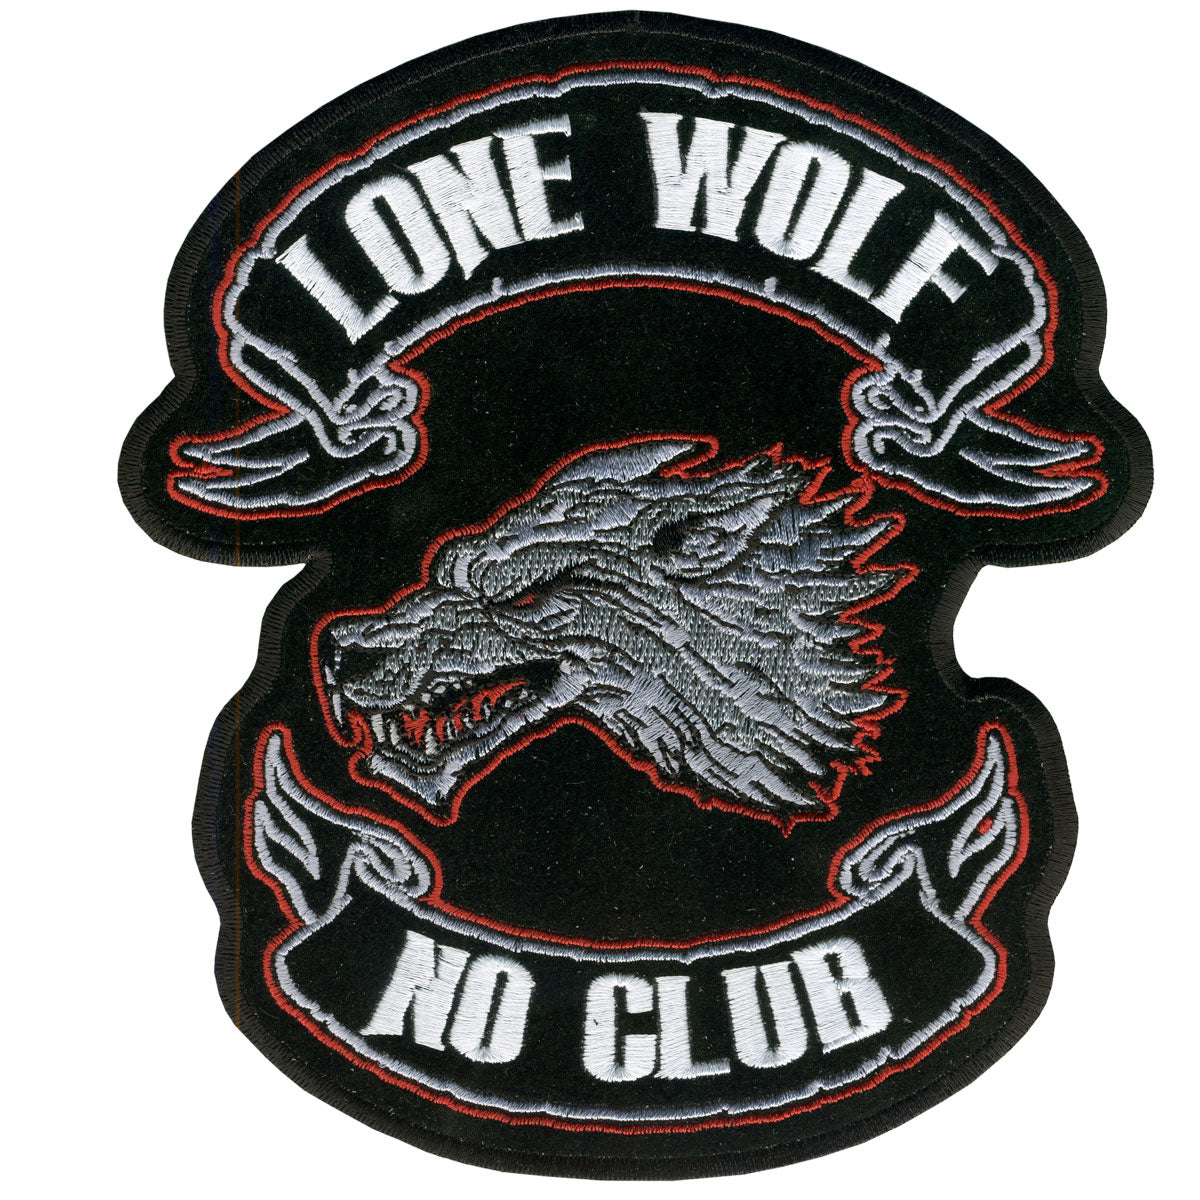 lone wolf patch